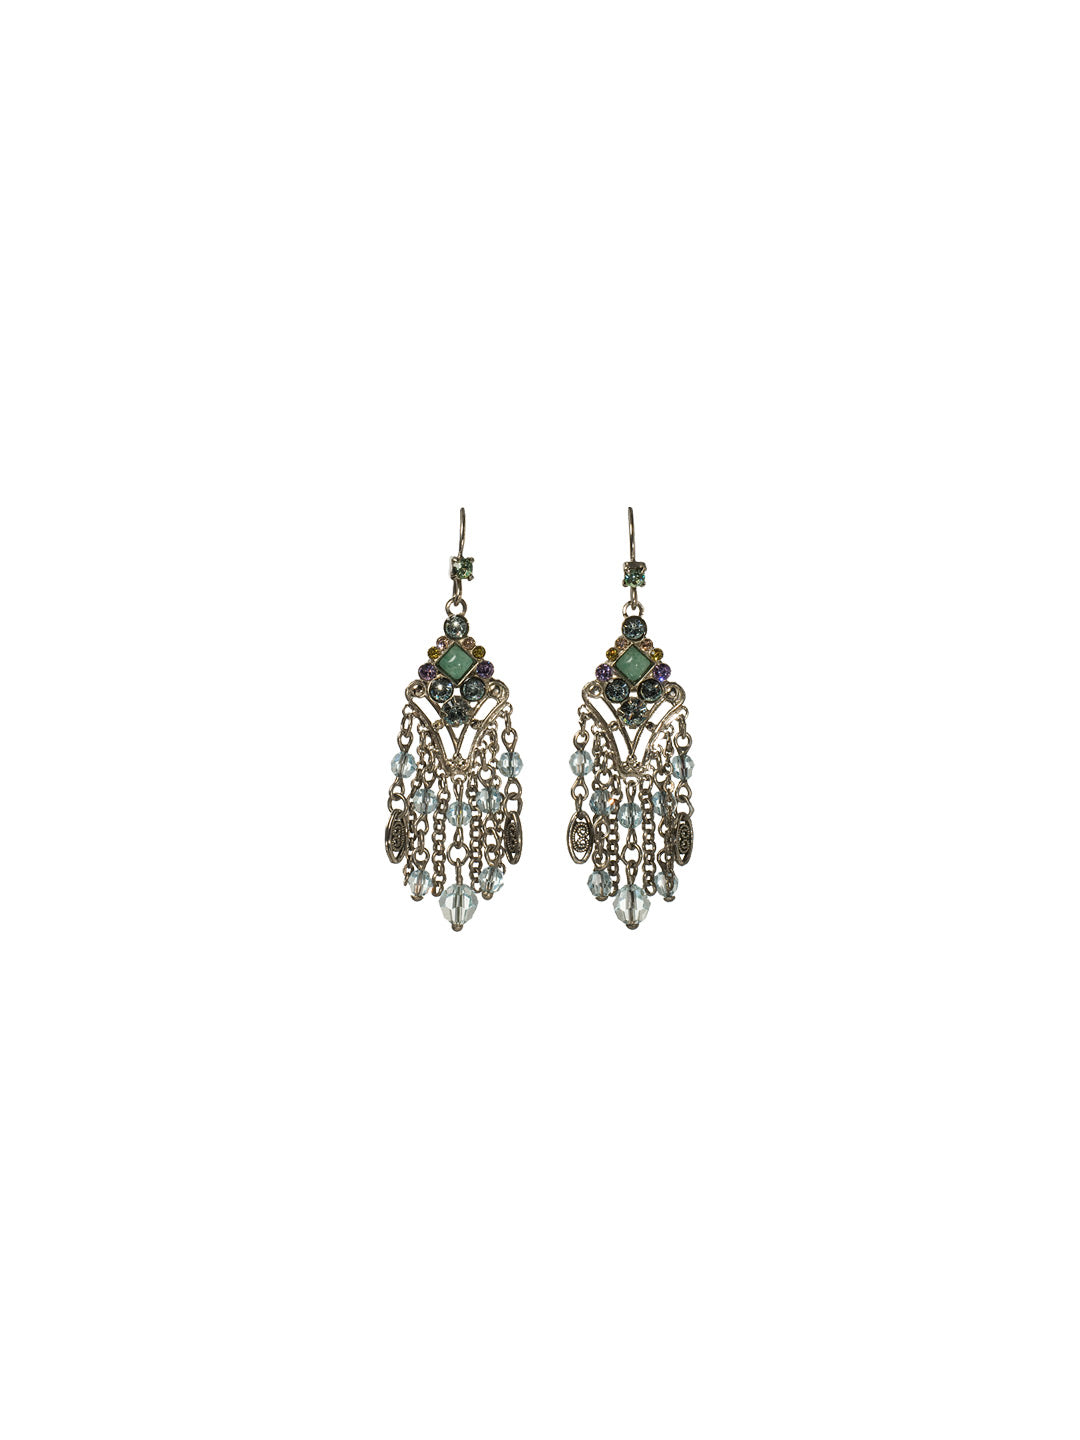 Crystal Fringe Earring - ECG29ASRW -  From Sorrelli's Running Water collection in our Antique Silver-tone finish.